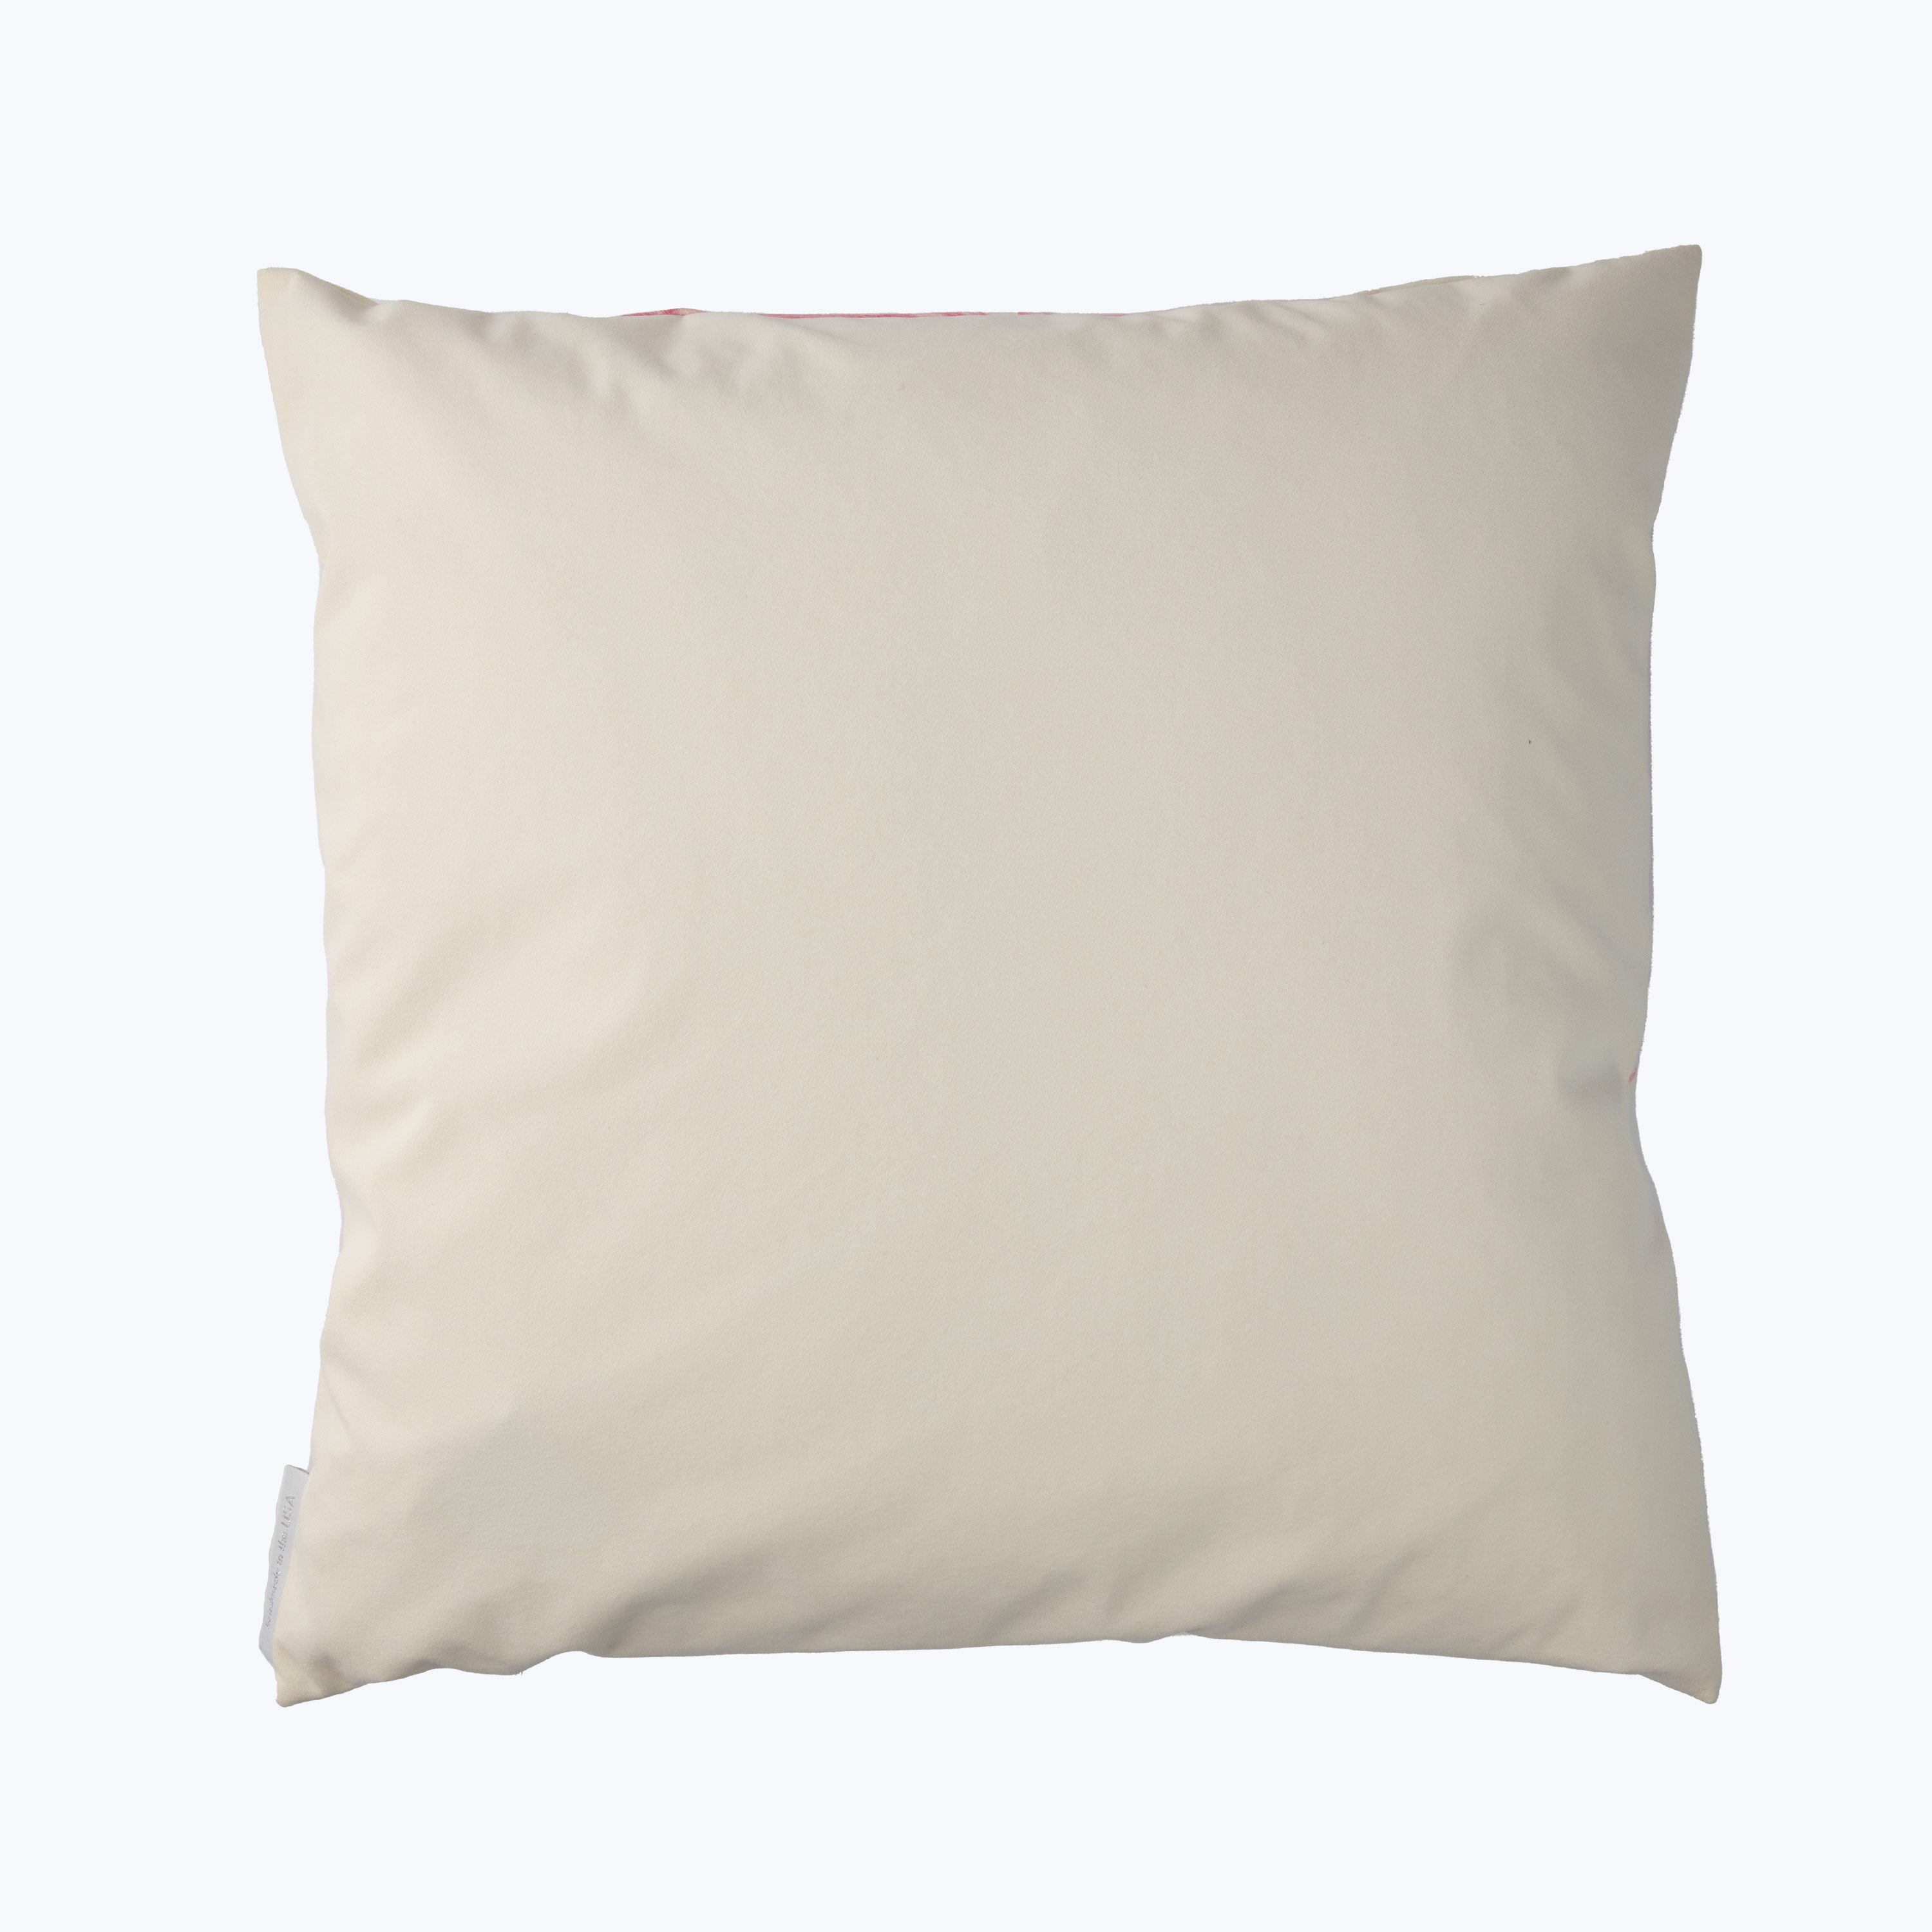 Plume Rose Finch Ivoire Eco Suede Pillow